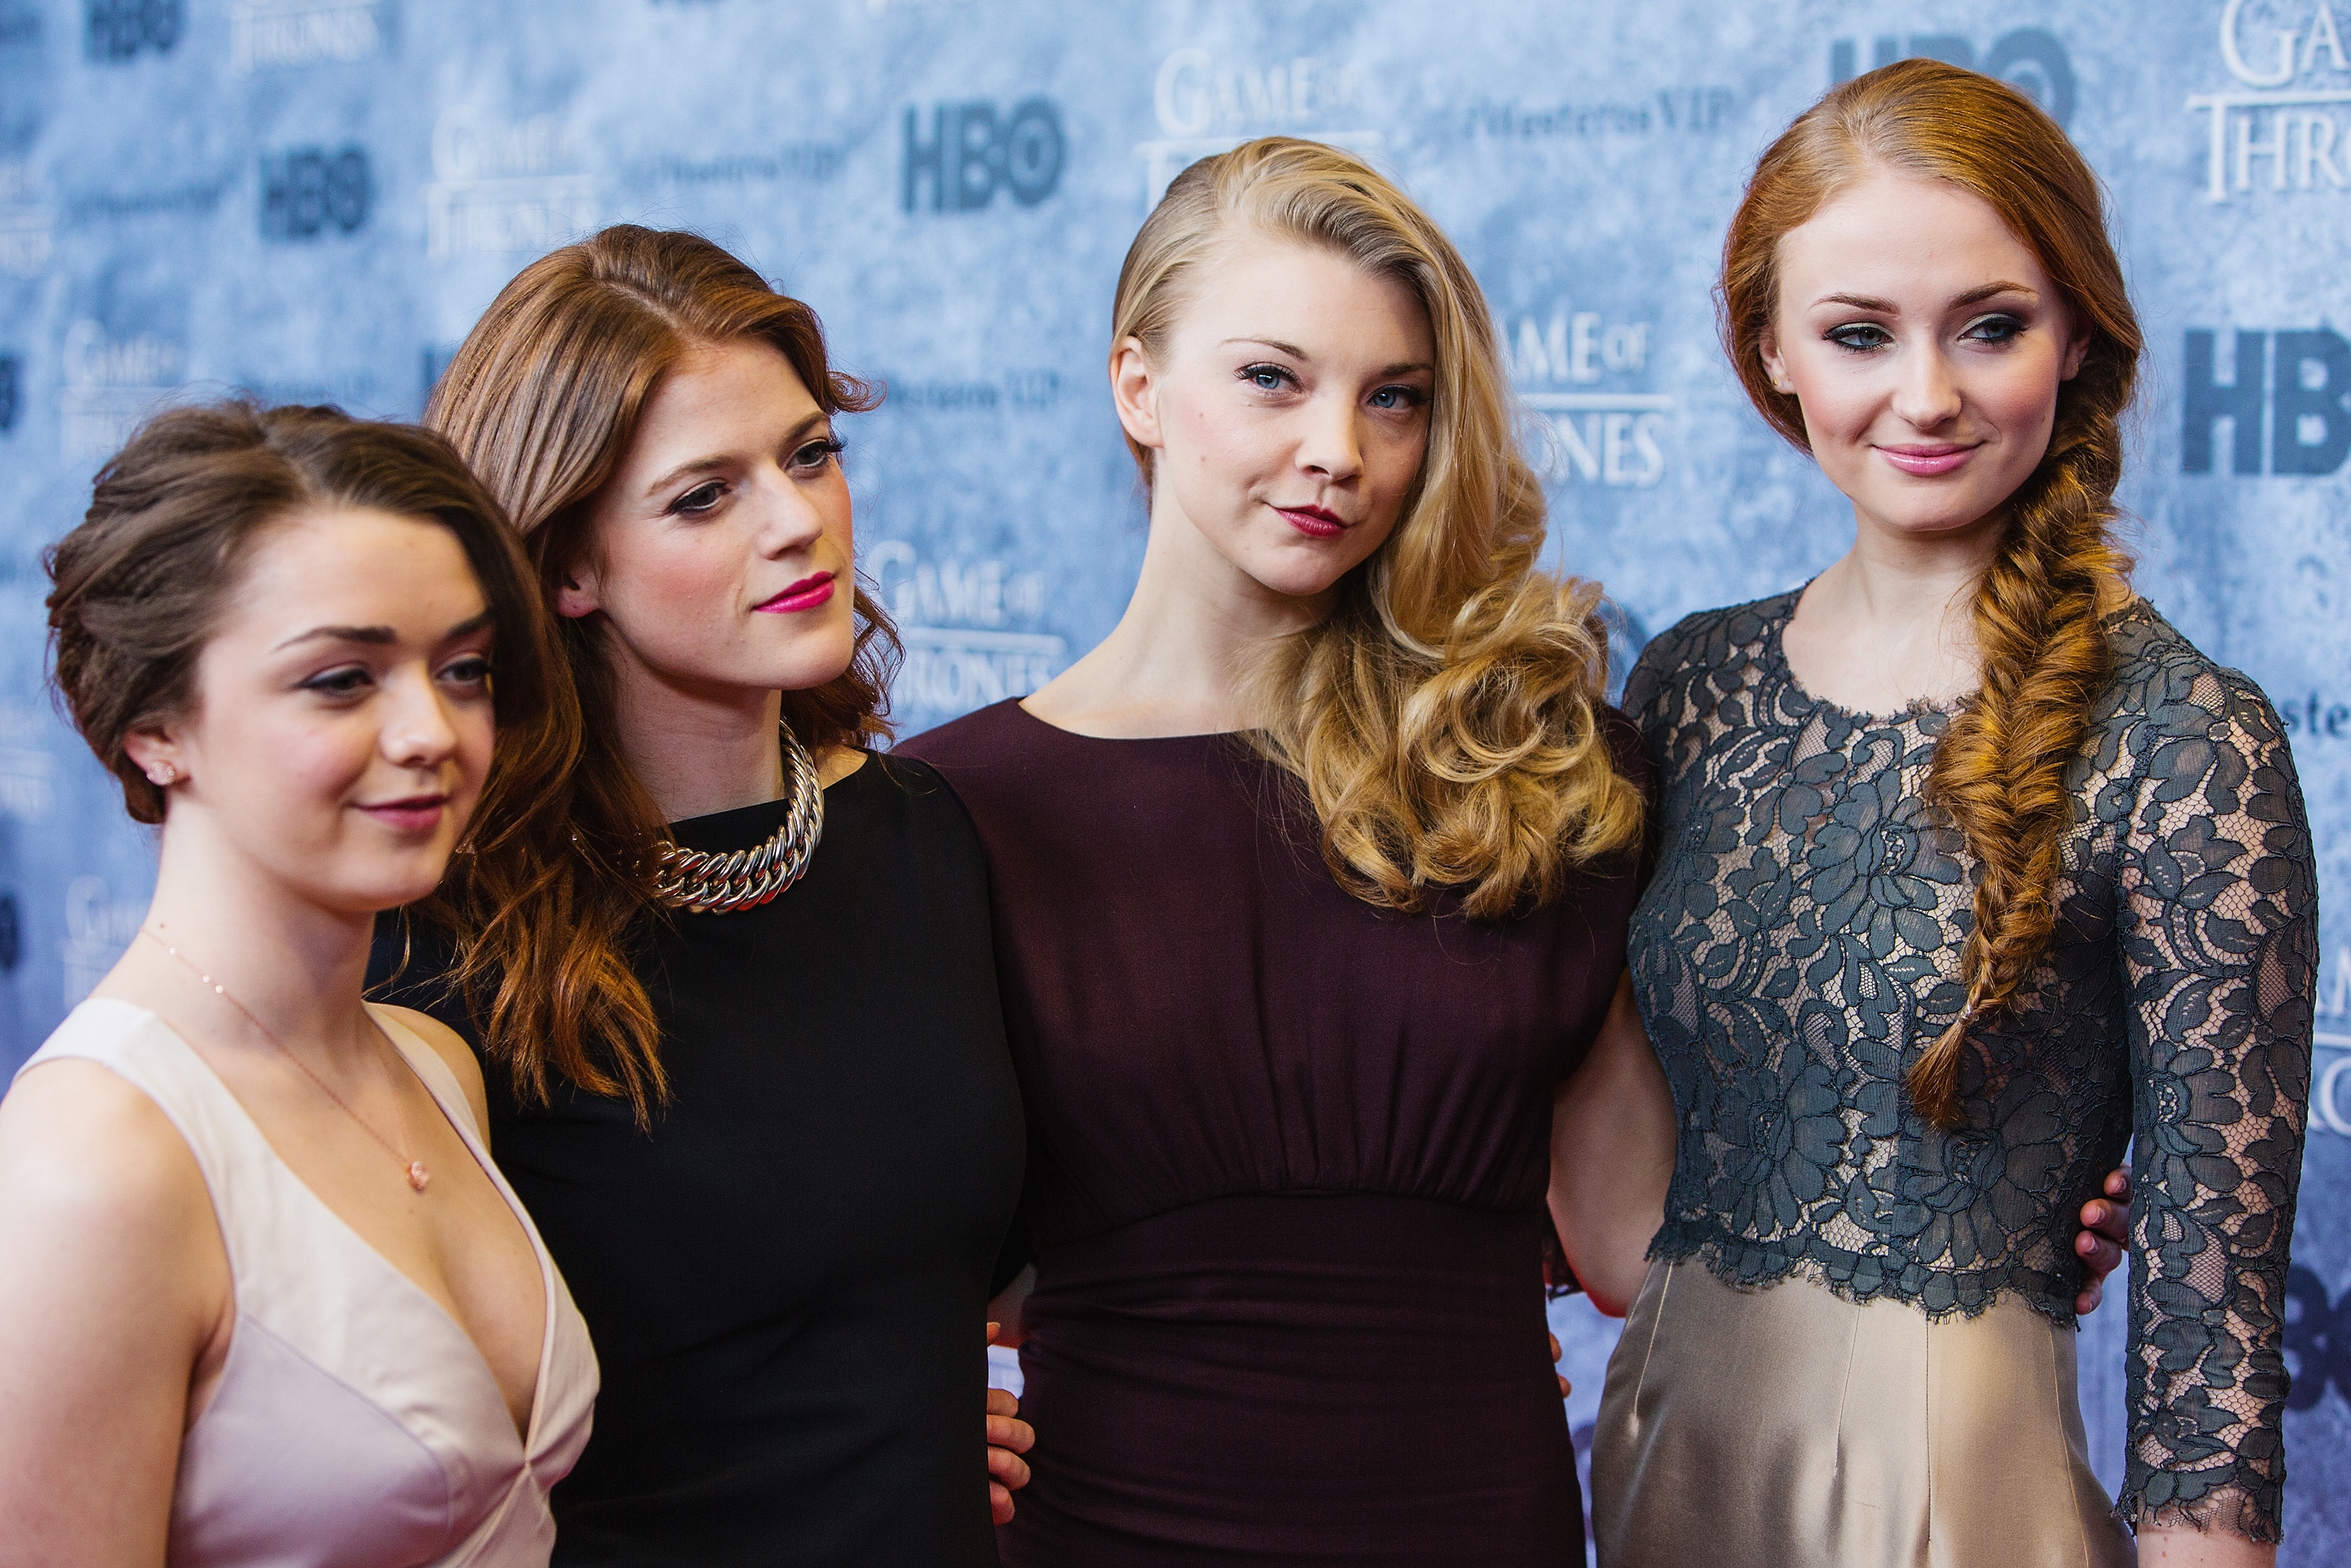 https://maisiewilliams.org/gallery/albums/Public Apperances/2013/March 21st-Game of Thrones Season 3 Seattle Premiere/0008.jpg